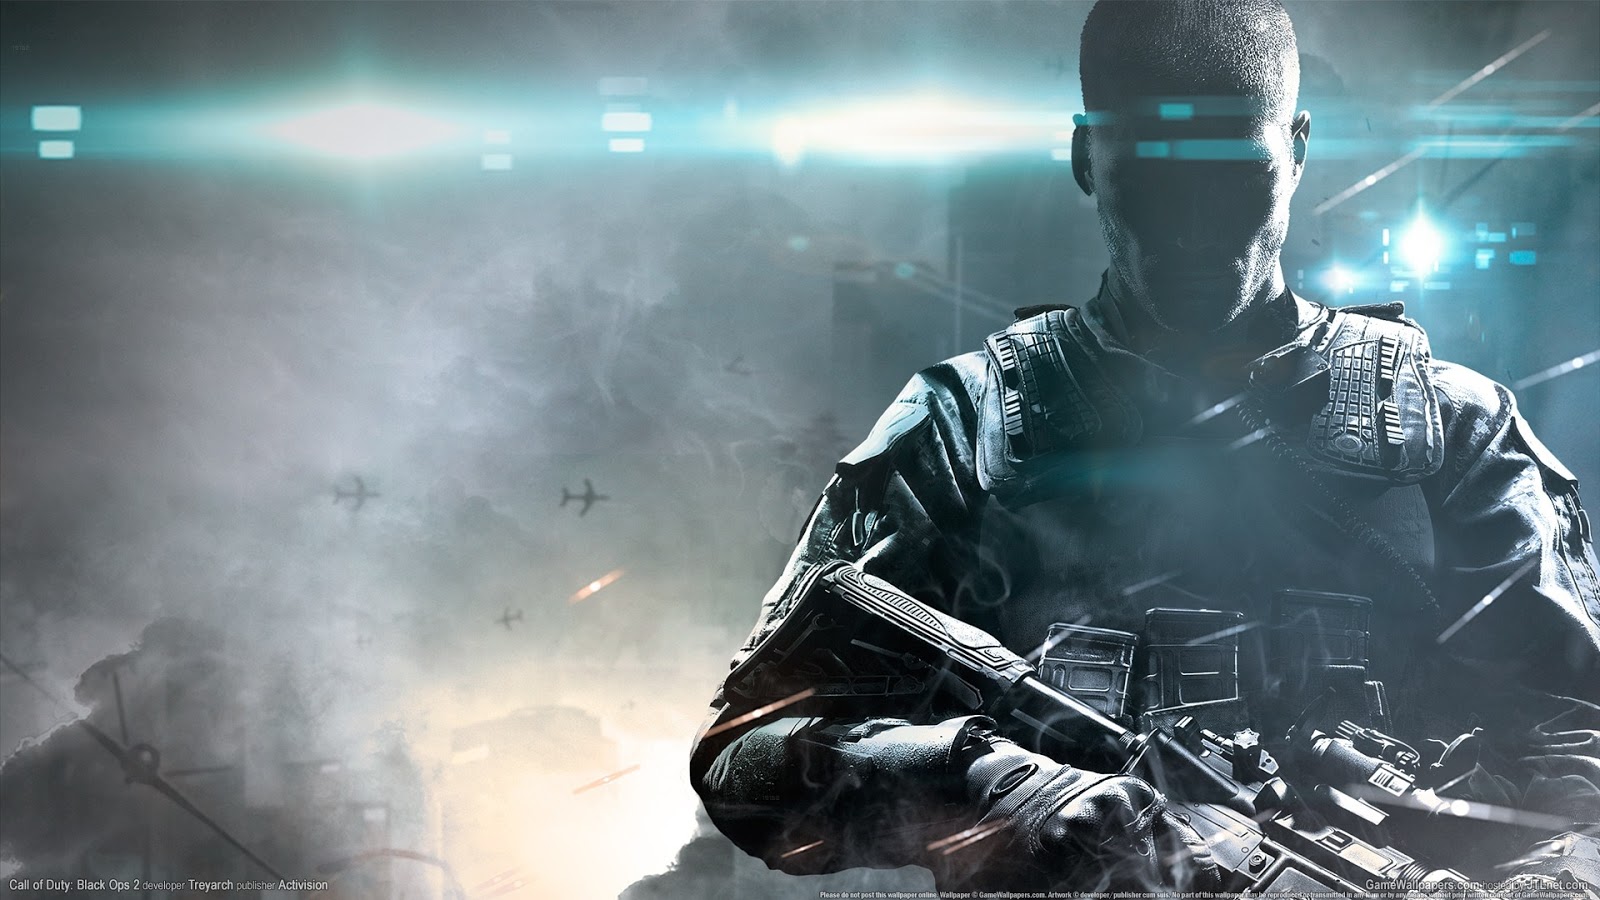  Call of duty black ops 2 wallpapers Wallcovers Call of duty 1600x900